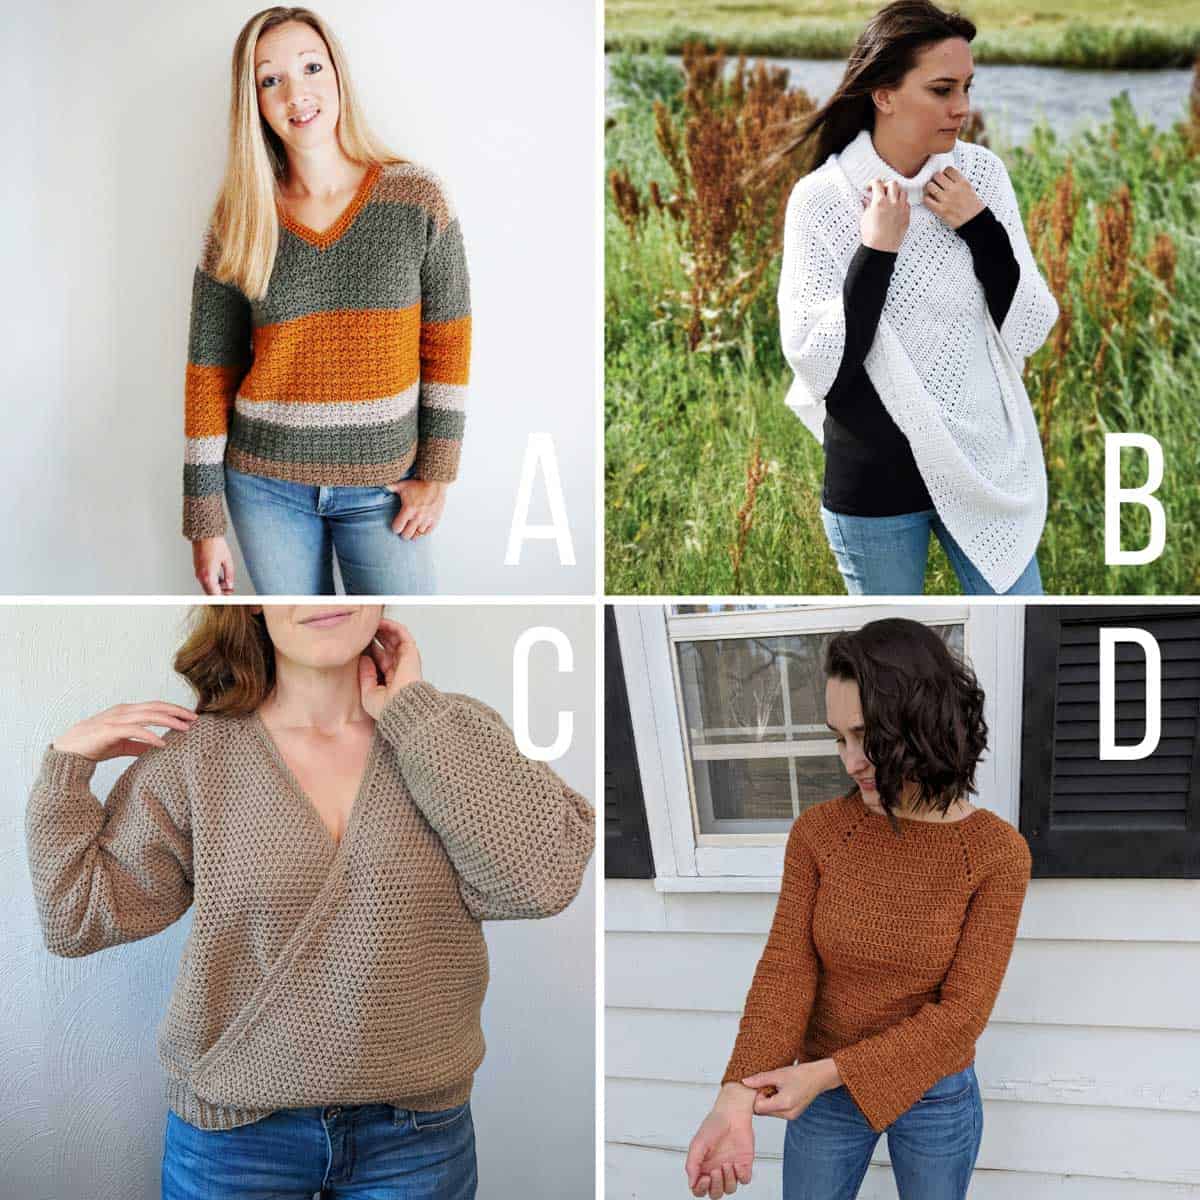 Grid of four free crochet sweater patterns. One is a striped v-neck crochet pullover sweater, one is a crochet poncho, one is a crochet wrap sweater and one is a raglan style crochet sweater.